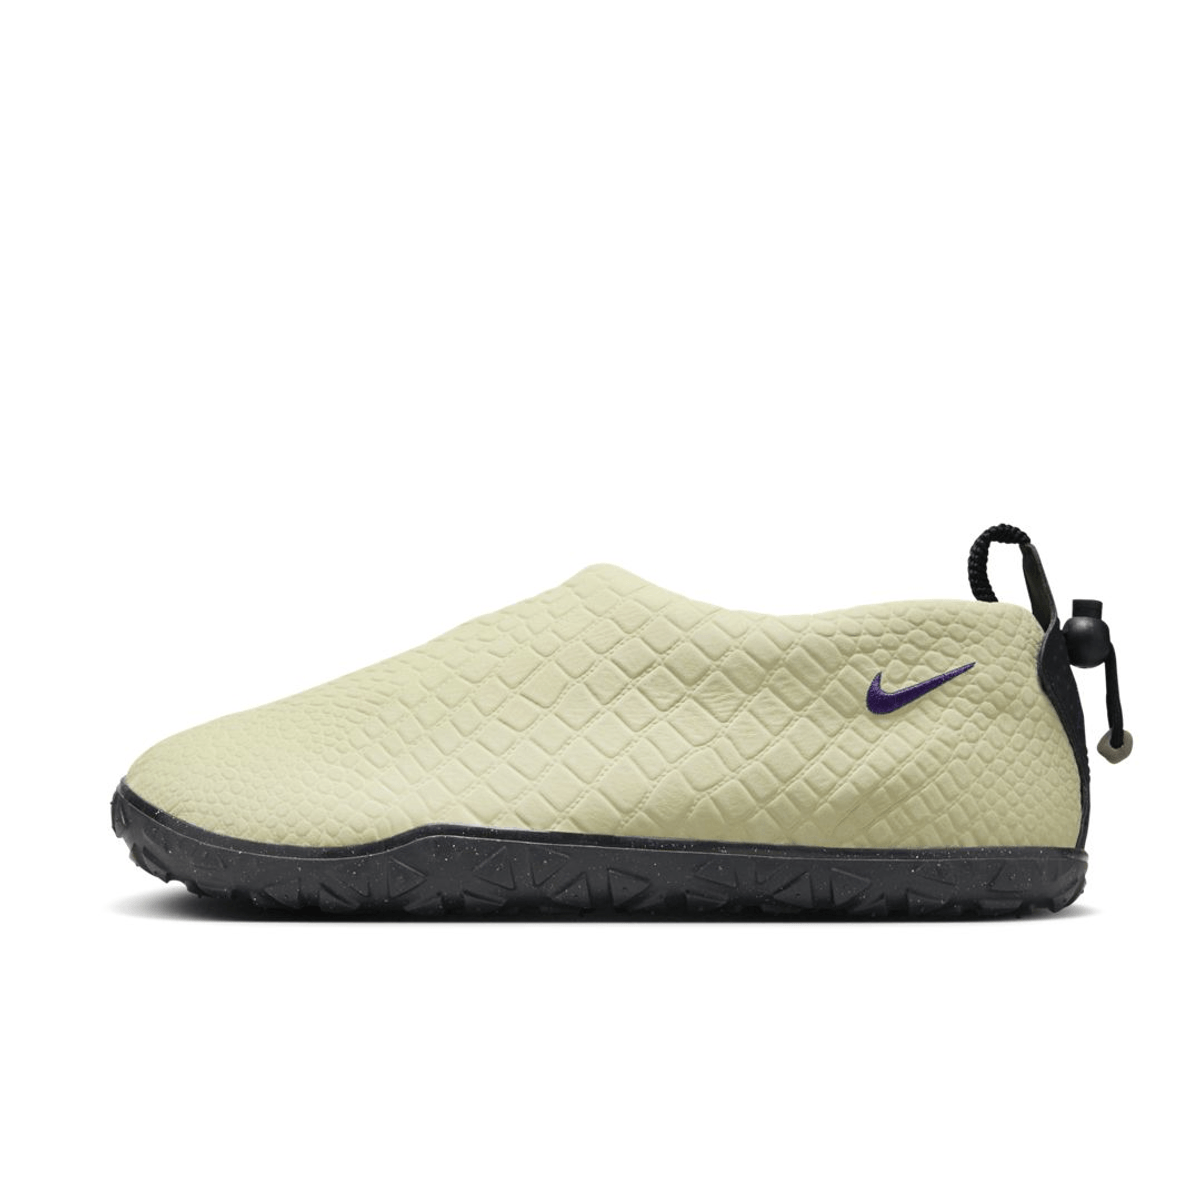 Official Images Of The Upcoming Nike ACG Moc Premium “Olive Aura”